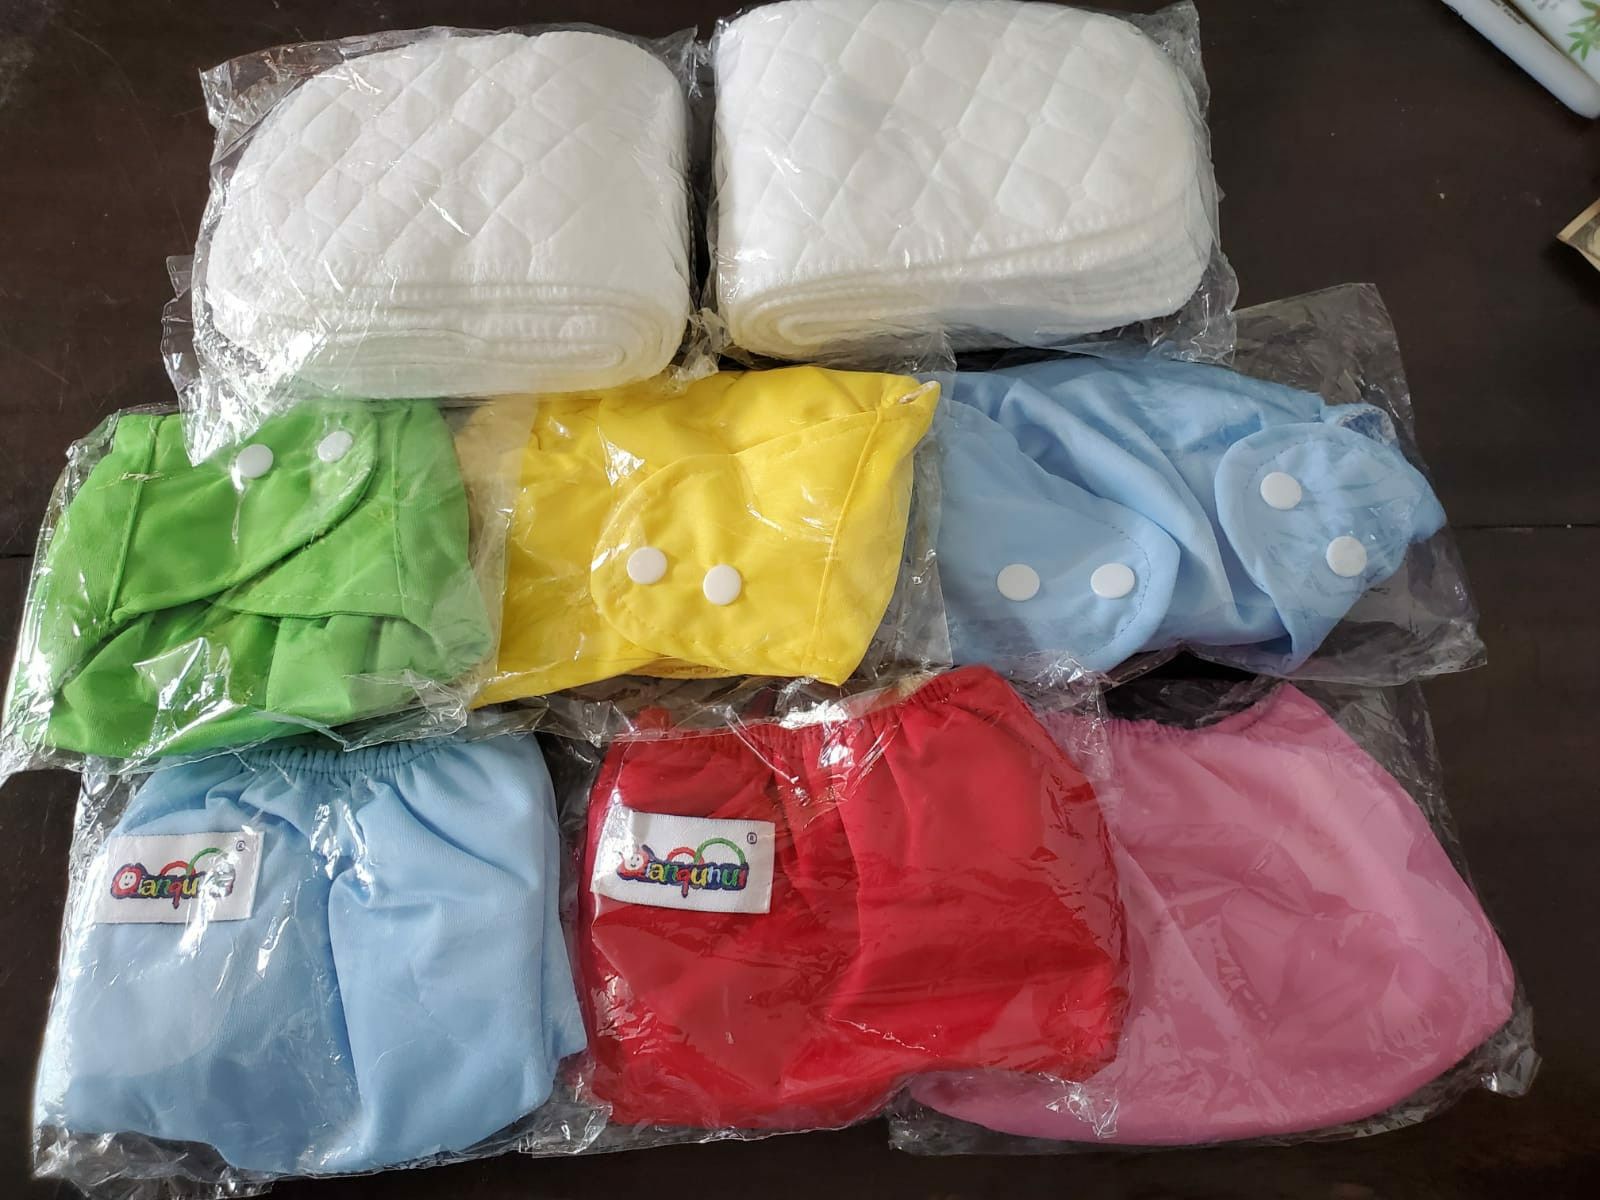 NEWWW WASHABLE DIAPERS AND PADS